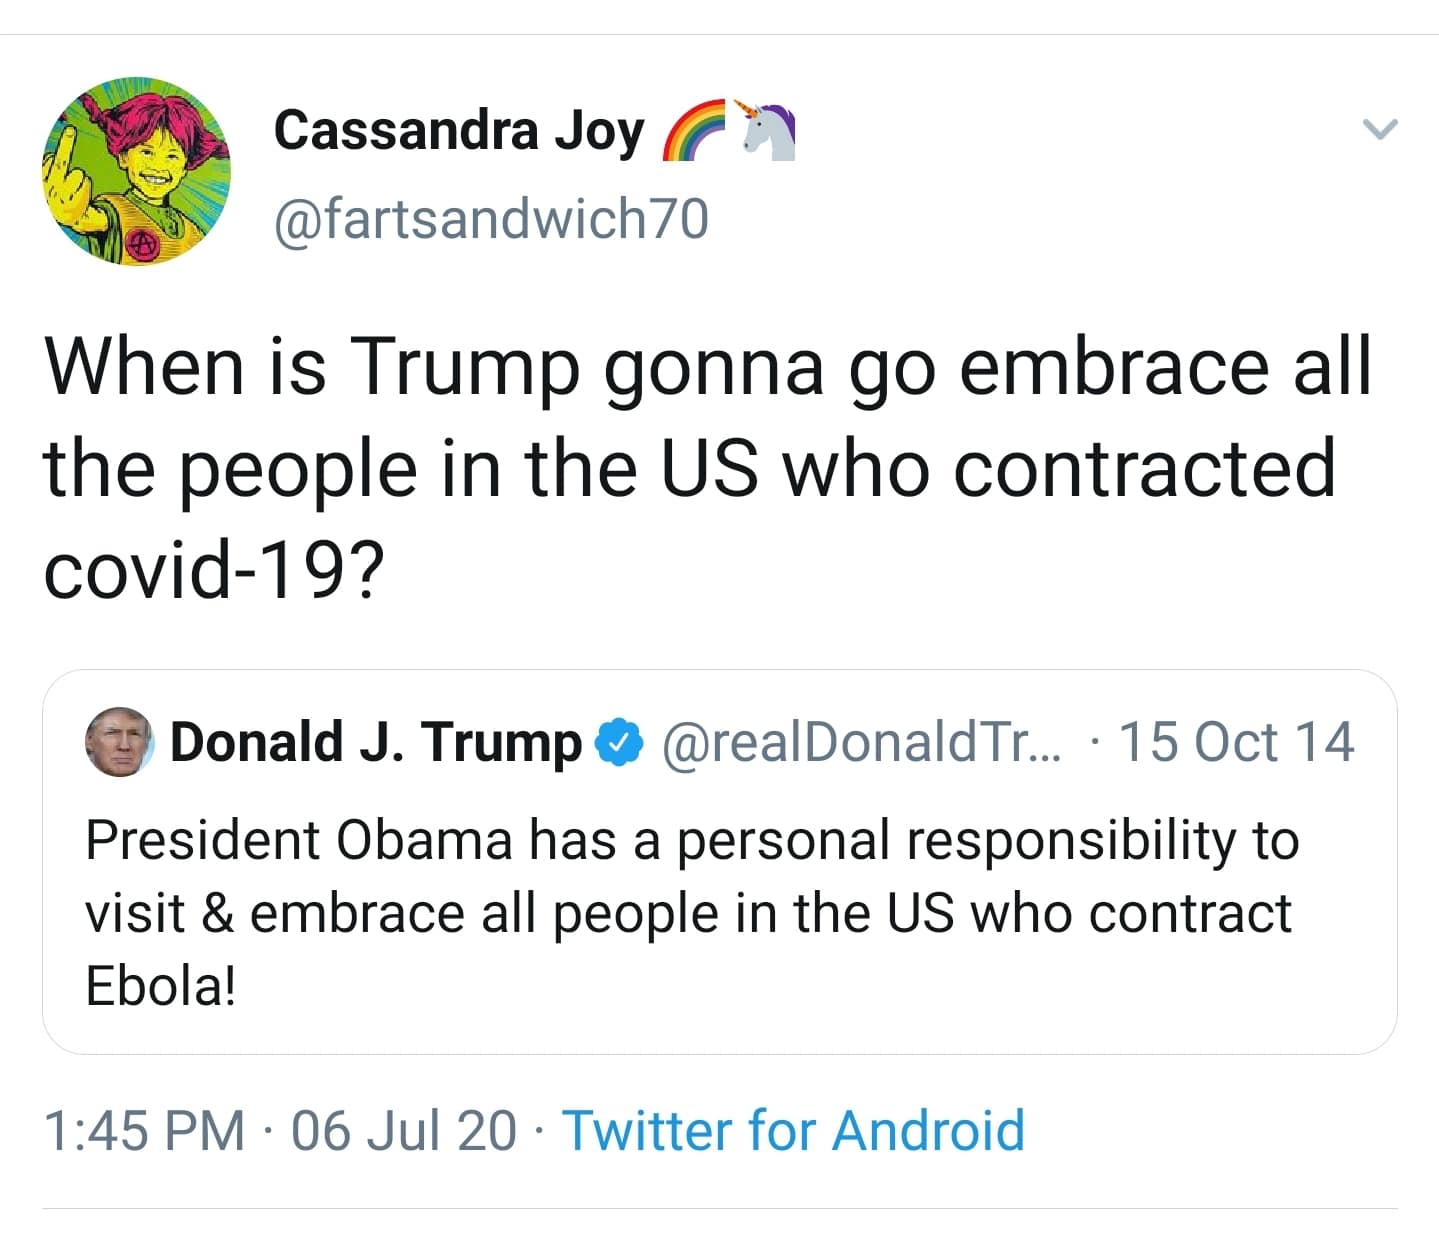 Political, Obama, Trump, Ebola, COVID, Trump Political Memes Political, Obama, Trump, Ebola, COVID, Trump text: Cassandra Joy @fartsandwich70 When is Trump gonna go embrace all the people in the US who contracted covid-1 9? Donald J. Trumpe @reaIDonaIdTr... •15 Oct 14 President Obama has a personal responsibility to visit & embrace all people in the US who contract Ebola! 1 PM • 06 Jul 20 • Twitter for Android 